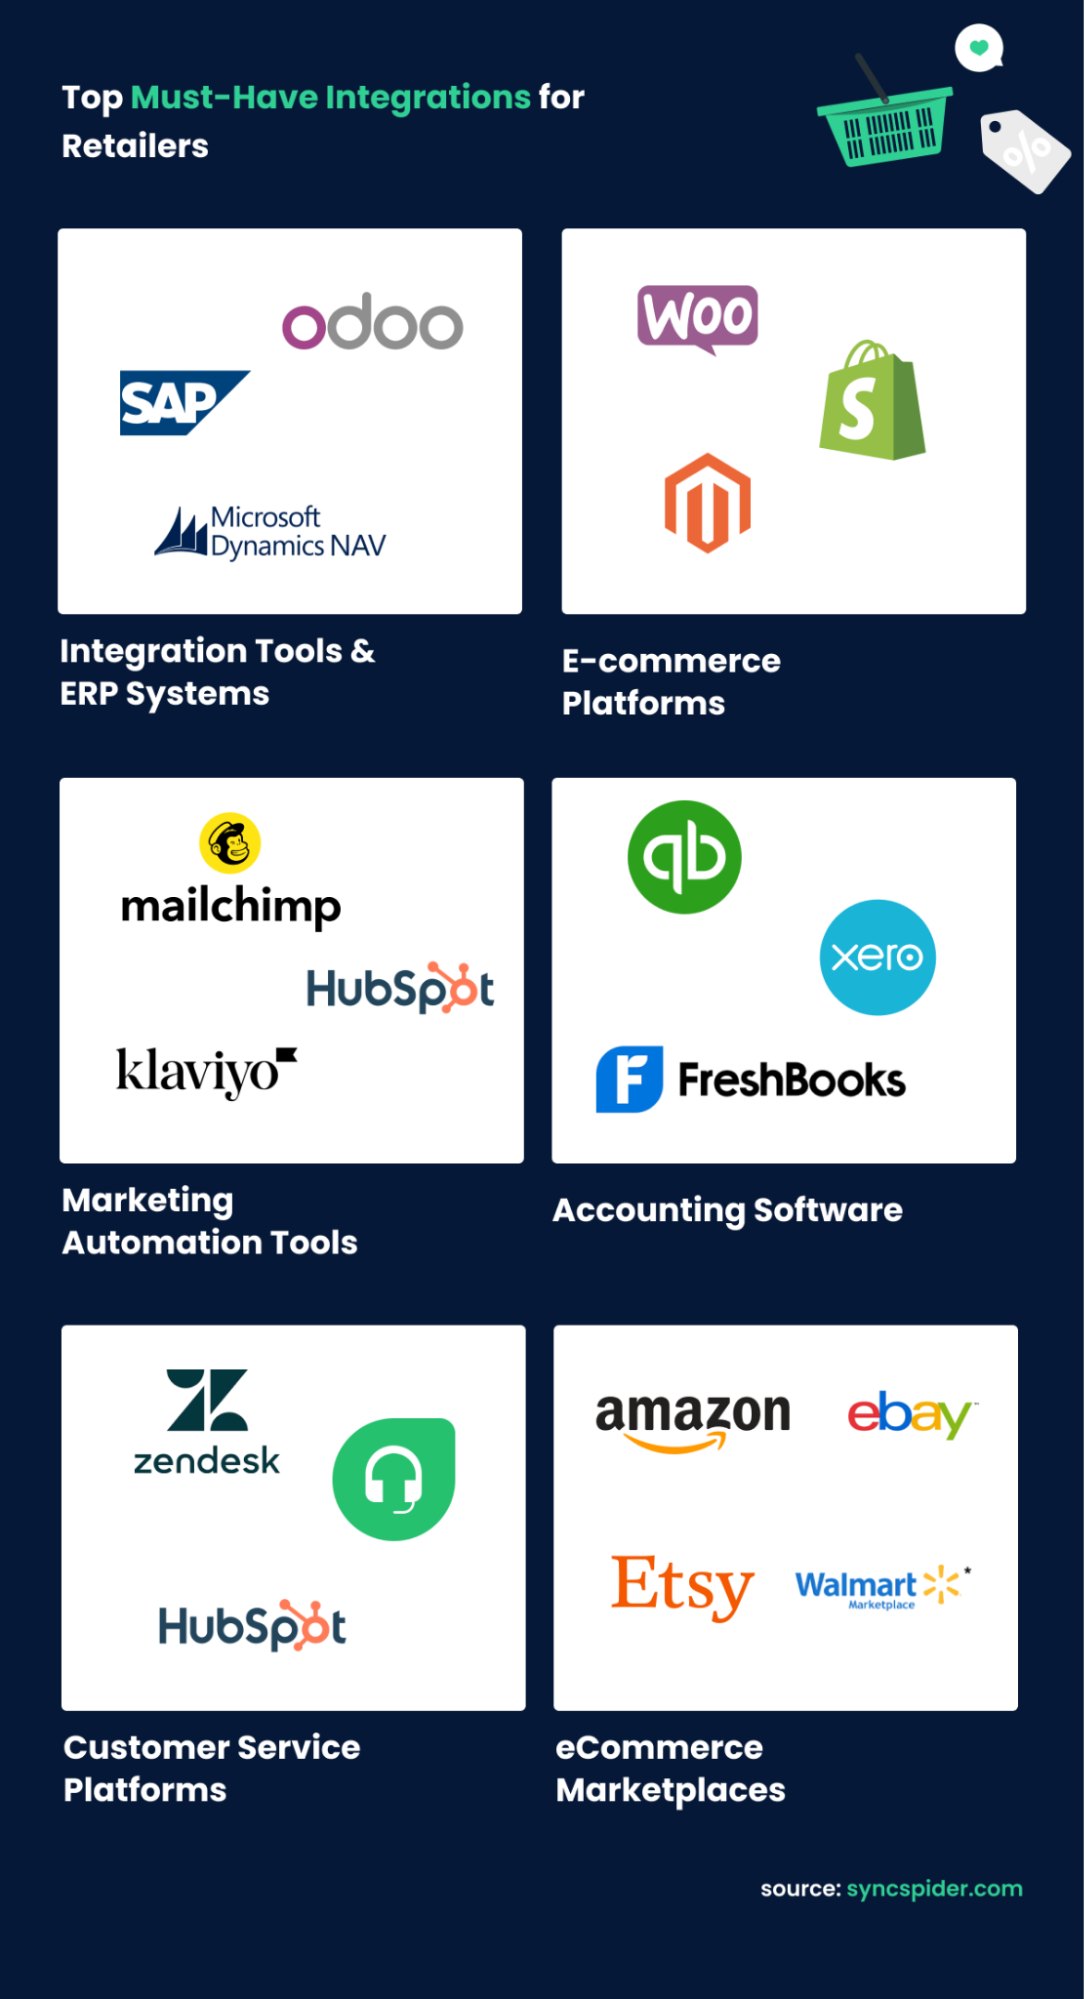 Must have integrations for retailers: integration tools, ERPs, eCommerce marketplaces, eCommerce and customer service platforms, accounting software, and marketing automation tools.